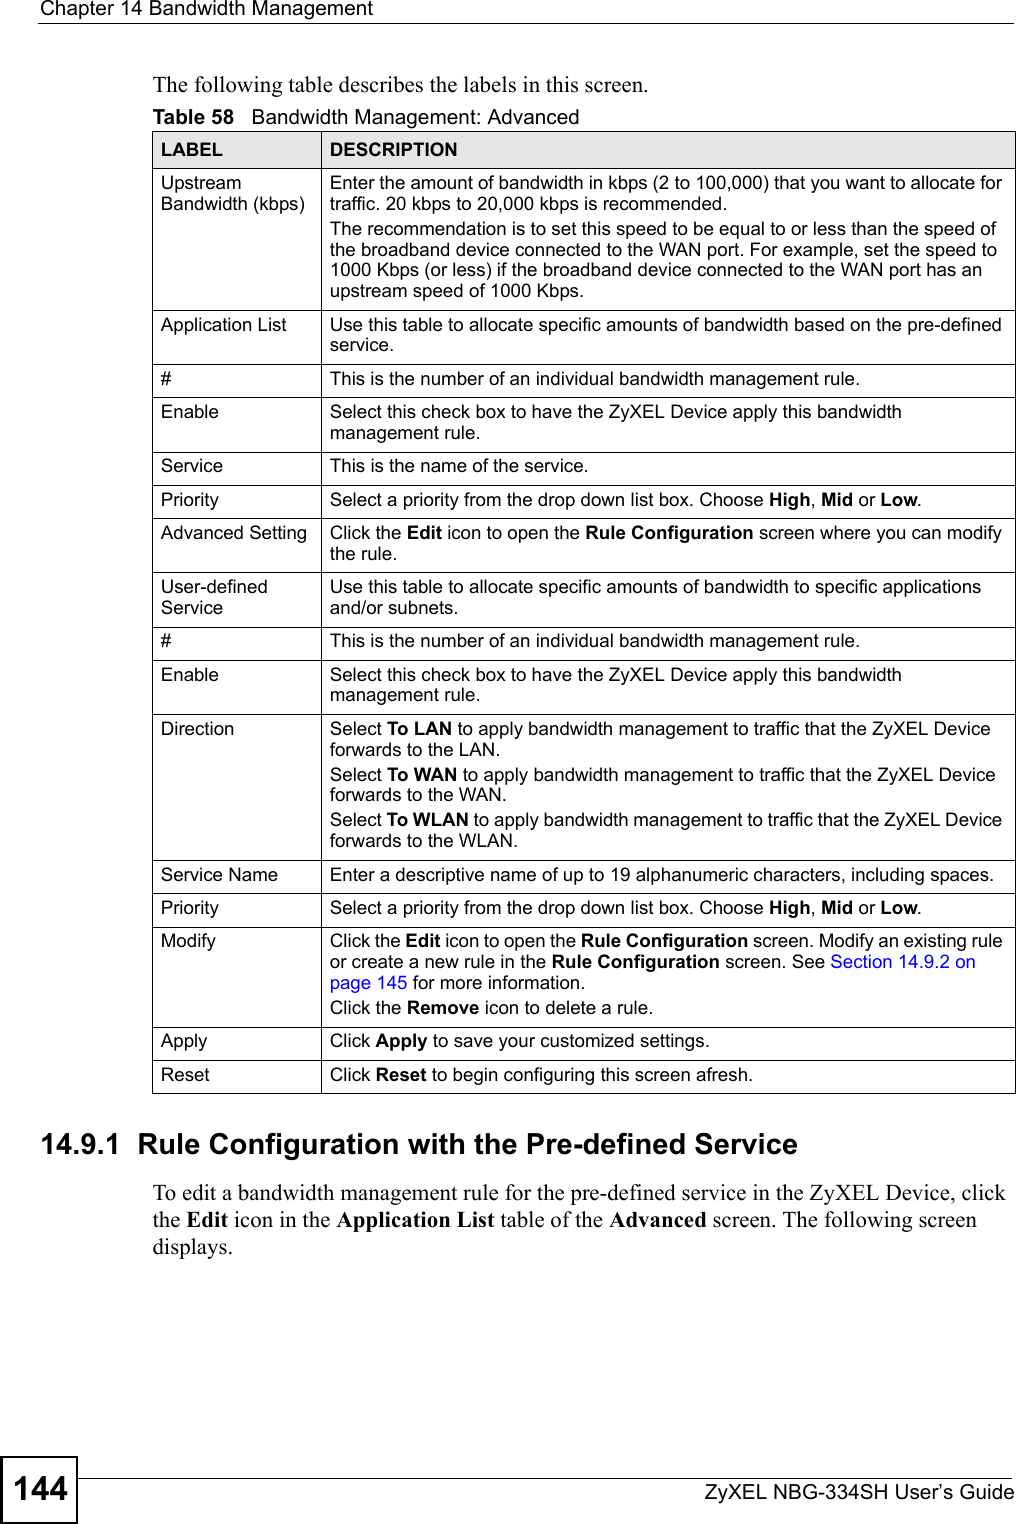 Chapter 14 Bandwidth ManagementZyXEL NBG-334SH User’s Guide144The following table describes the labels in this screen.14.9.1  Rule Configuration with the Pre-defined Service    To edit a bandwidth management rule for the pre-defined service in the ZyXEL Device, click the Edit icon in the Application List table of the Advanced screen. The following screen displays.Table 58   Bandwidth Management: AdvancedLABEL DESCRIPTIONUpstream Bandwidth (kbps) Enter the amount of bandwidth in kbps (2 to 100,000) that you want to allocate for traffic. 20 kbps to 20,000 kbps is recommended.The recommendation is to set this speed to be equal to or less than the speed of the broadband device connected to the WAN port. For example, set the speed to 1000 Kbps (or less) if the broadband device connected to the WAN port has an upstream speed of 1000 Kbps.Application List Use this table to allocate specific amounts of bandwidth based on the pre-defined service.#This is the number of an individual bandwidth management rule.Enable Select this check box to have the ZyXEL Device apply this bandwidth management rule.Service This is the name of the service.Priority Select a priority from the drop down list box. Choose High, Mid or Low.Advanced Setting  Click the Edit icon to open the Rule Configuration screen where you can modify the rule.User-defined Service Use this table to allocate specific amounts of bandwidth to specific applications and/or subnets.#This is the number of an individual bandwidth management rule.Enable Select this check box to have the ZyXEL Device apply this bandwidth management rule.Direction  Select To LAN to apply bandwidth management to traffic that the ZyXEL Device forwards to the LAN. Select To WAN to apply bandwidth management to traffic that the ZyXEL Device forwards to the WAN. Select To WLAN to apply bandwidth management to traffic that the ZyXEL Device forwards to the WLAN. Service Name Enter a descriptive name of up to 19 alphanumeric characters, including spaces.Priority Select a priority from the drop down list box. Choose High, Mid or Low.Modify Click the Edit icon to open the Rule Configuration screen. Modify an existing rule or create a new rule in the Rule Configuration screen. See Section 14.9.2 on page 145 for more information.Click the Remove icon to delete a rule.Apply Click Apply to save your customized settings.Reset Click Reset to begin configuring this screen afresh.